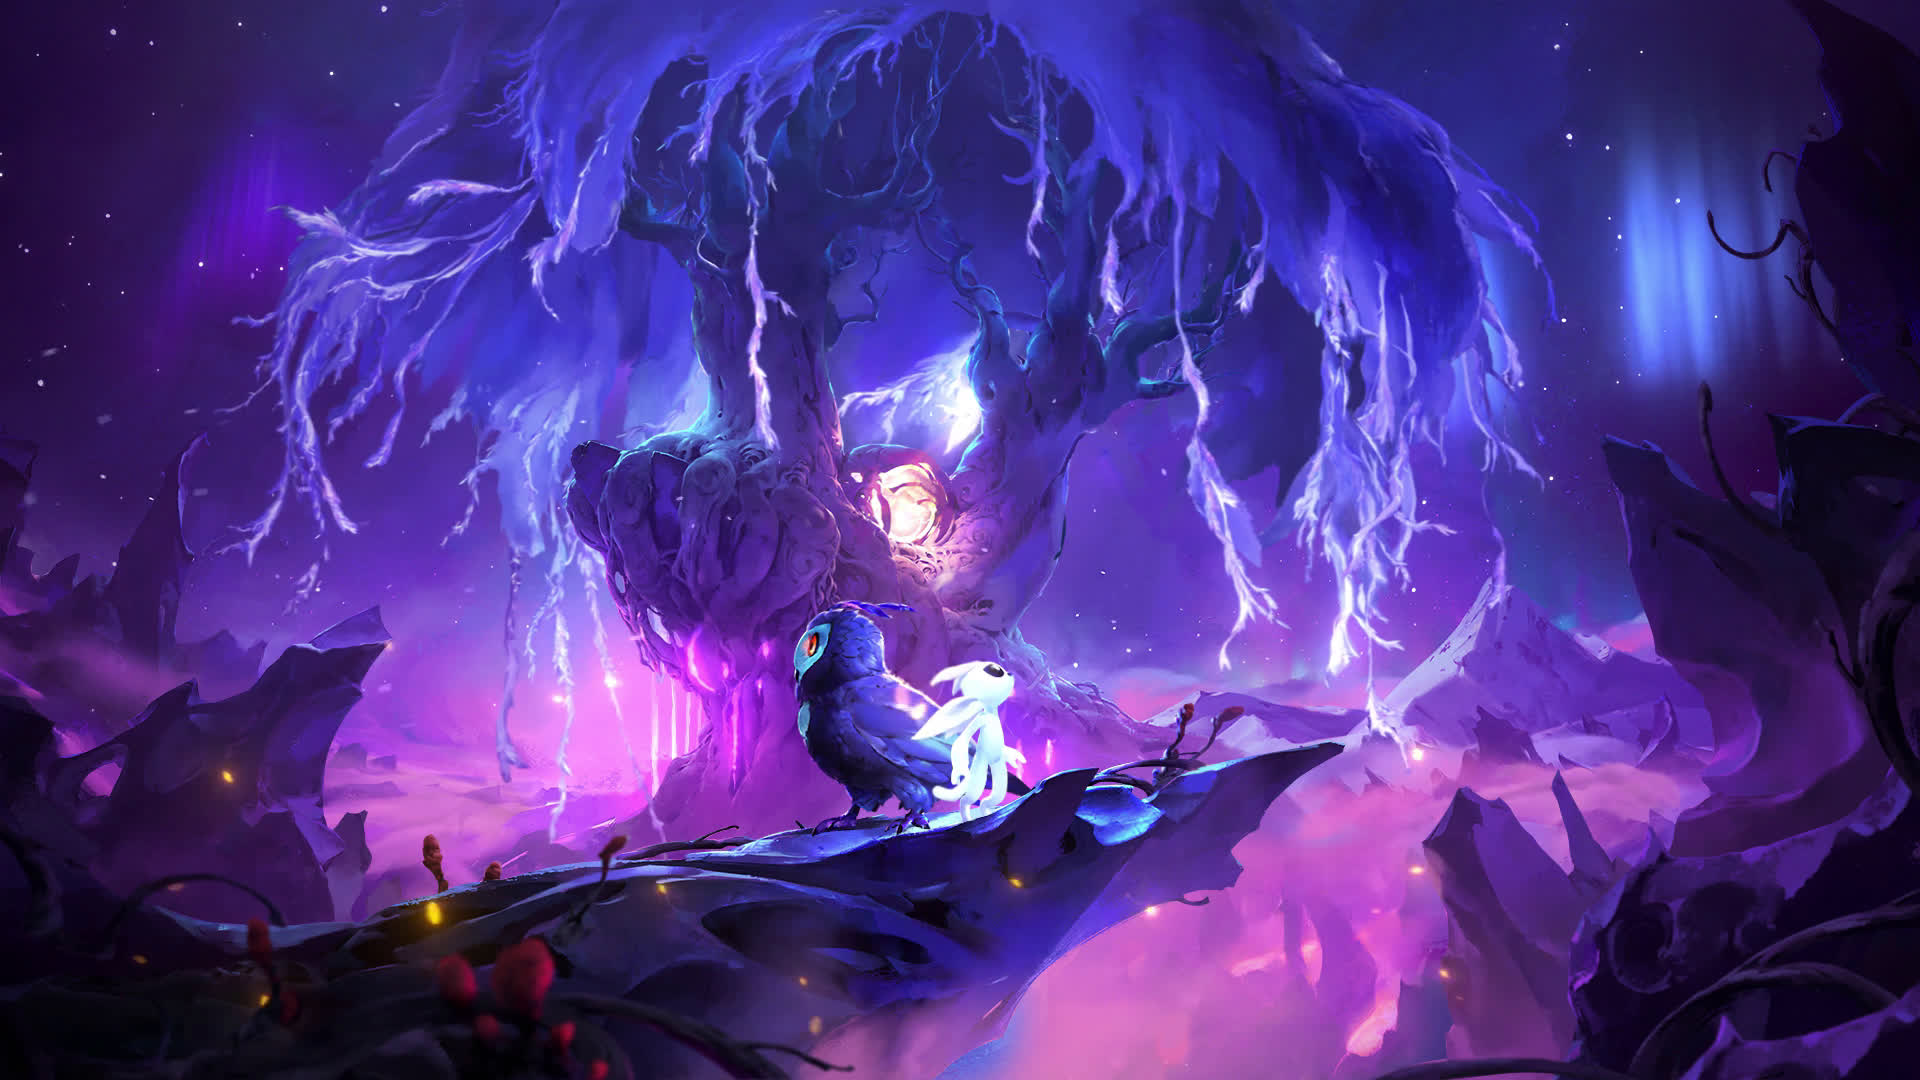 Ori And The Will Of The Wisps - Live Wallpaper - Embed